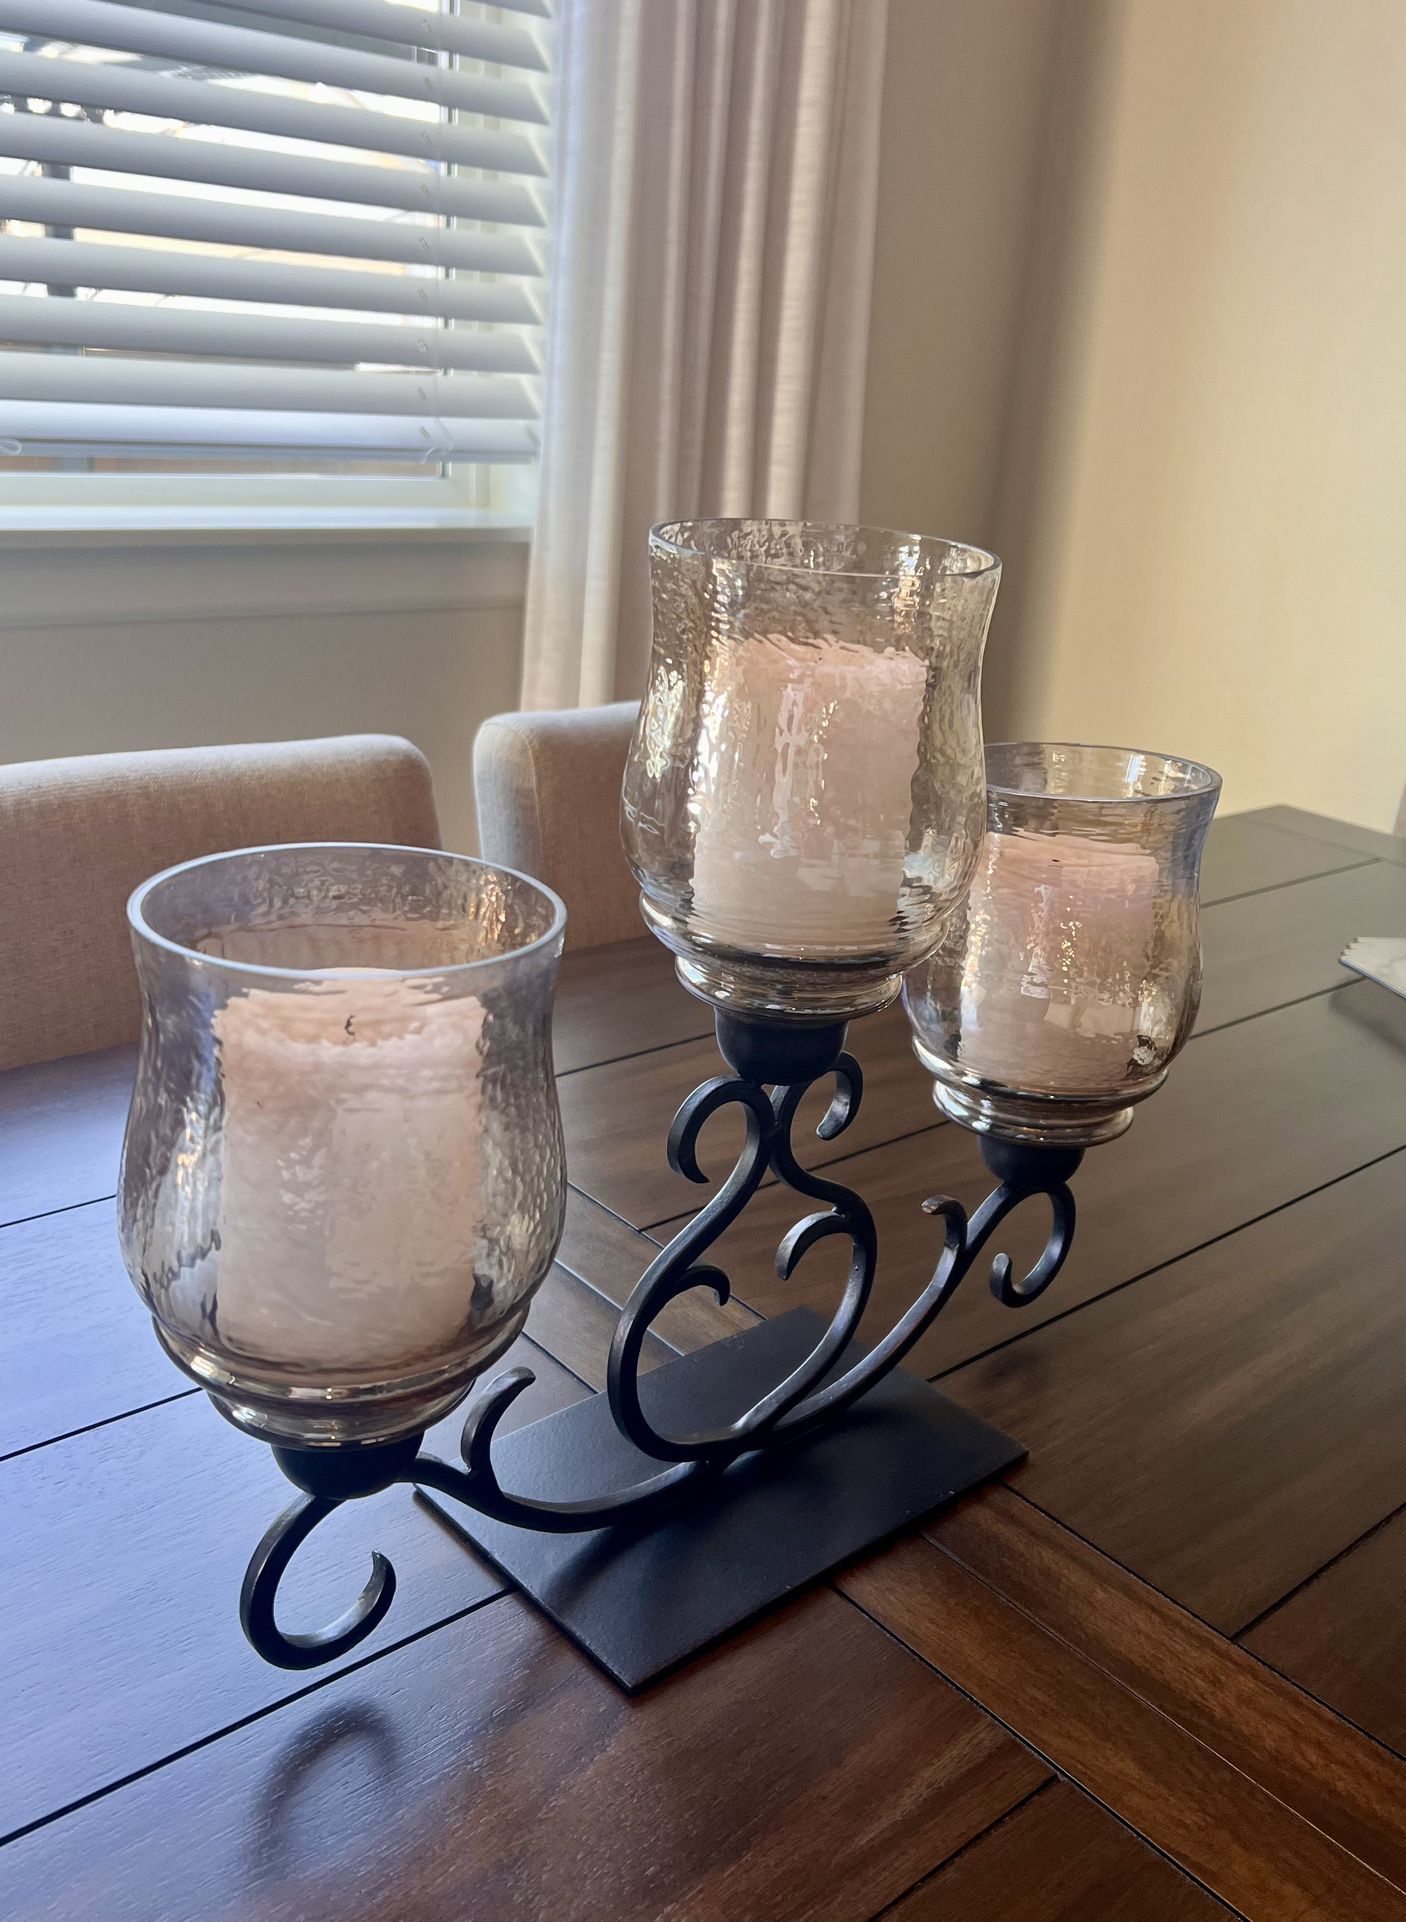 Candle Holder With Candles